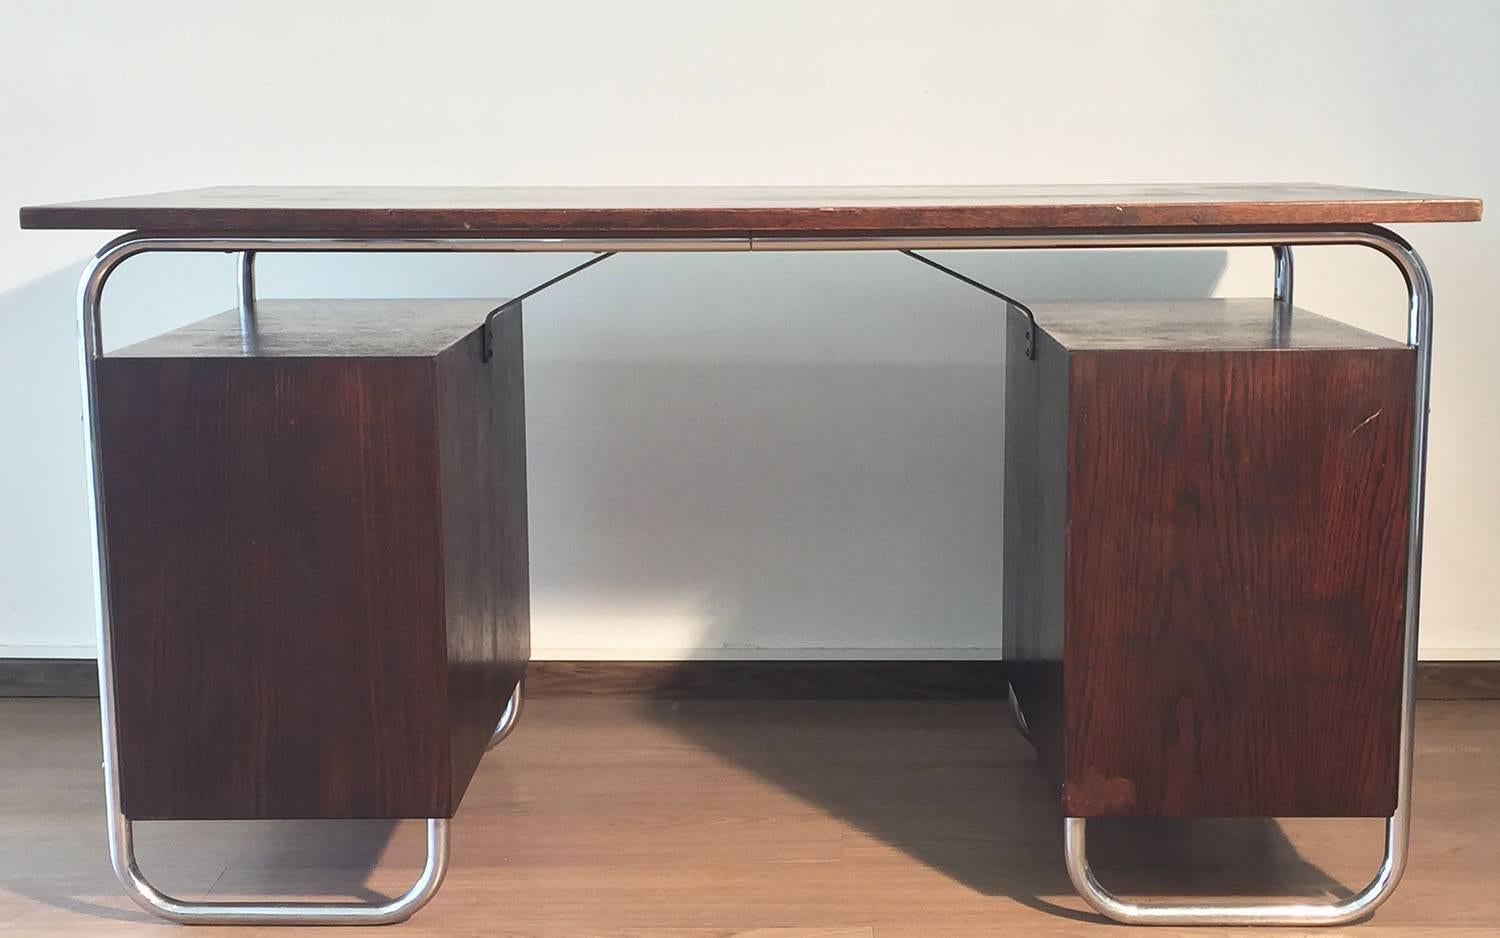 Chromed Steel and Tinted Beech Bauhaus Desk by Petr Vichr for Kovona, 1930s For Sale 2